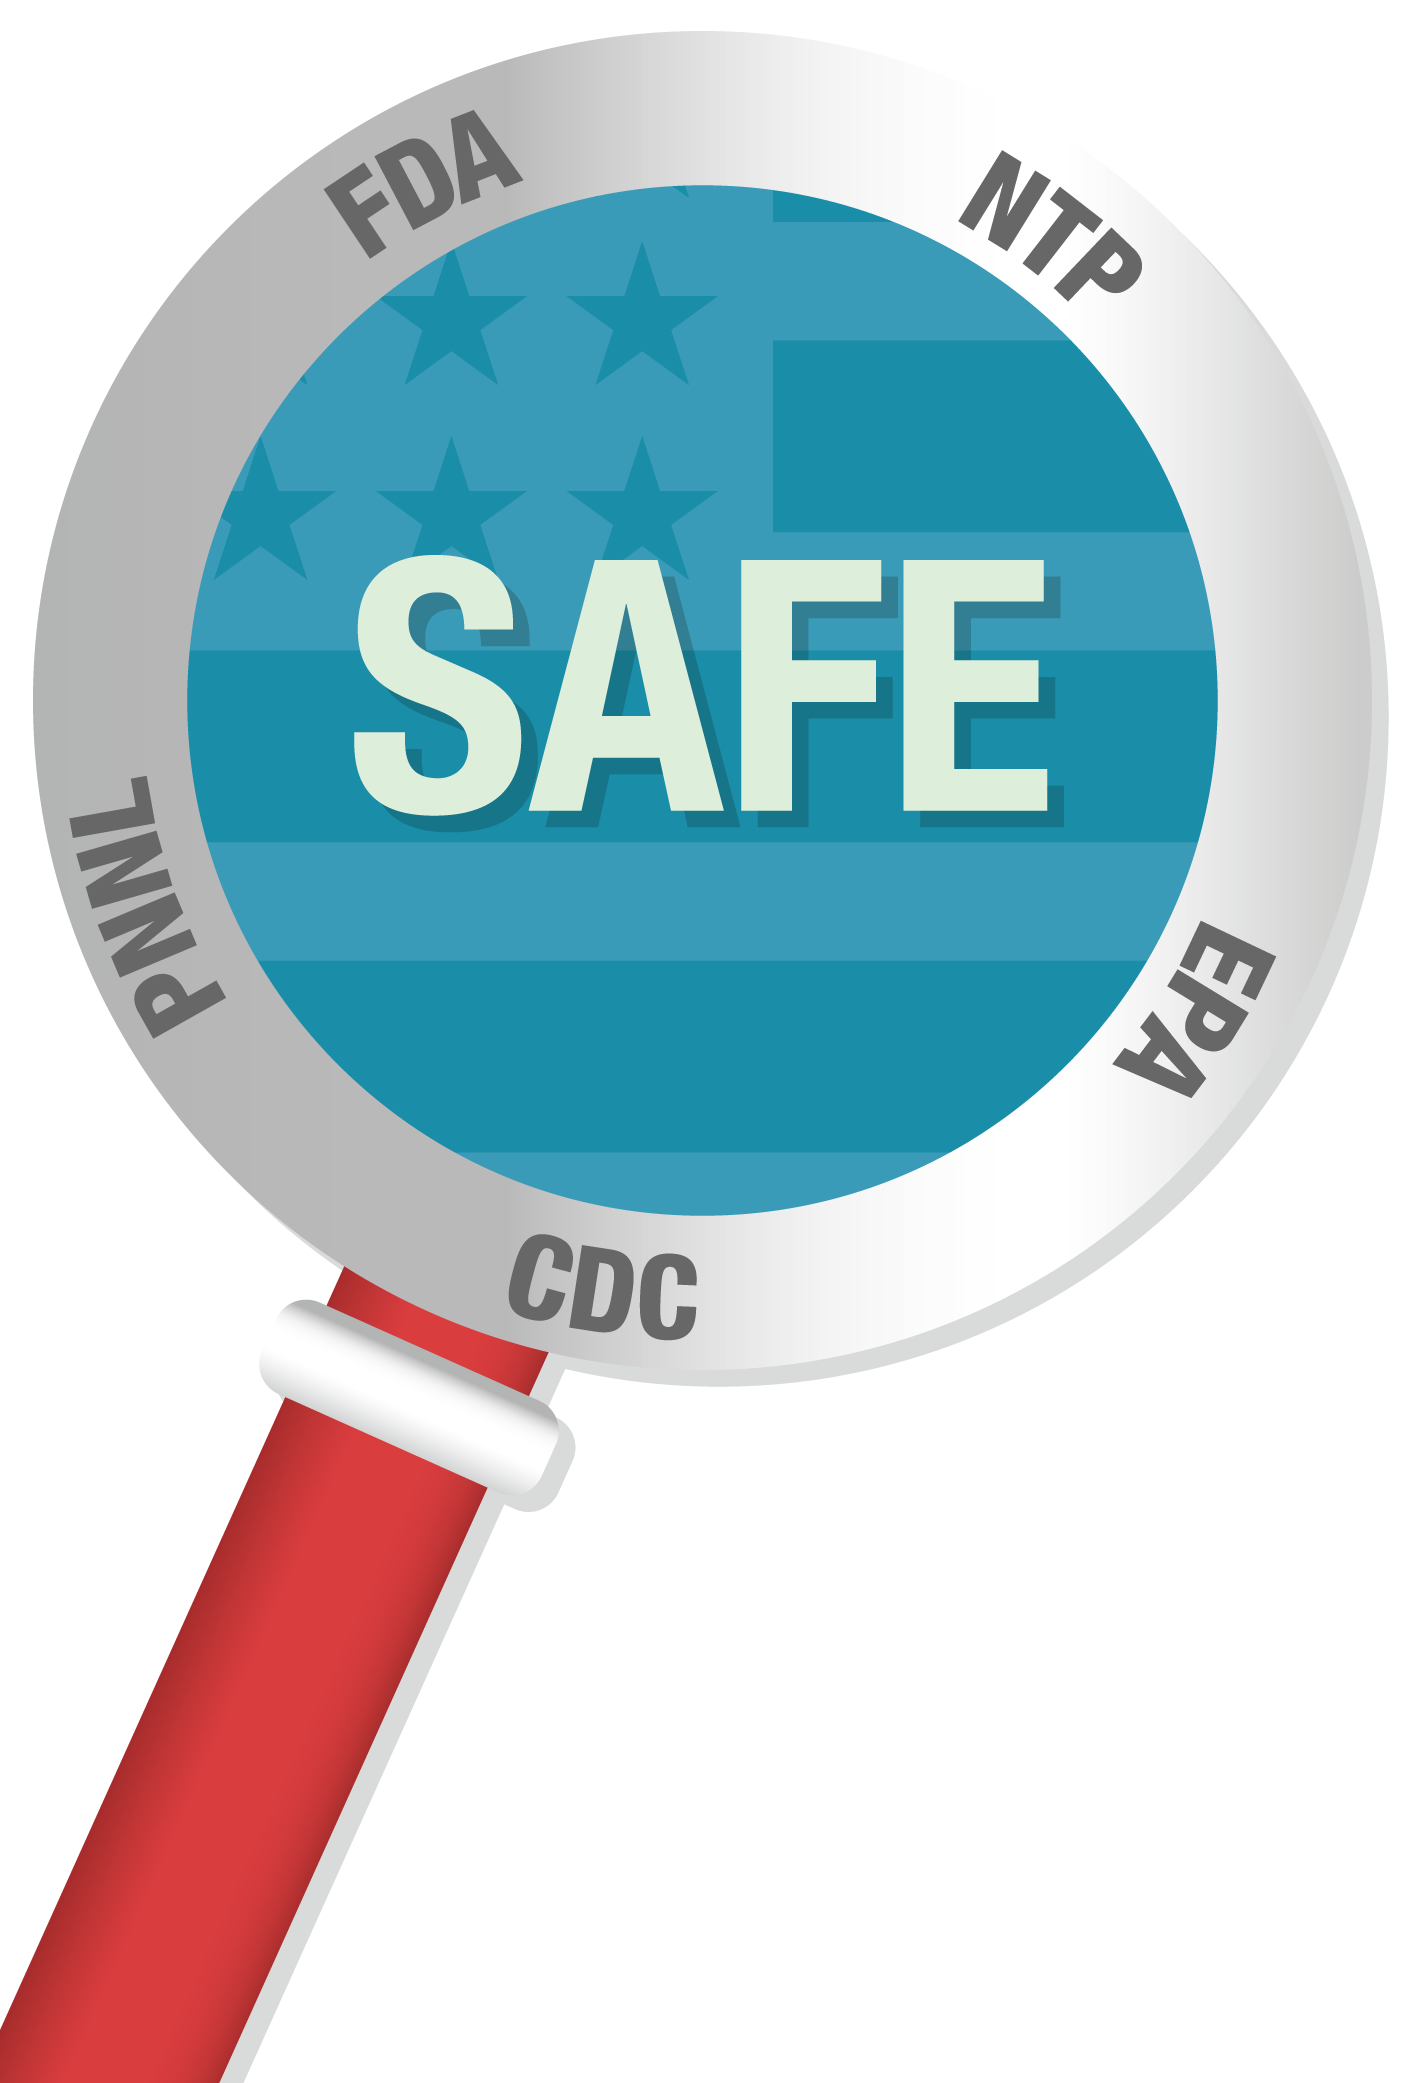 A magnifying glass labeled with the names of U.S. government agencies, including the FDA, CDC, EPA, NTP and PNNL demonstrates all the government agencies that have found BPA is safe., Safe Exposure Limits: A consumer would have to ingest 1,300 pounds of food and beverages in contact with polycarbonate plastic every day to exceed the safe level of BPA set by U.S. government agencies., Silhoutte of human body showing the average consumer's intake of BPA is 2.4 micrograms per day, A plate of food suggests consumers are often exposed to low levels of BPA through food and beverages, A clock represents the fact that the human body metabolizes and eliminates BPA within 24 hours, Microscope with words, No BPA Detected shows no active BPA could be detected after 24 hours, A family represents the idea that consumers of all ages can metabolize BPA, Safe Exposure Limits: Consumer exposure to BPA 1,000 times below safe limit,Laboratory vials with a dropper represent government researchers' toxicity study of BPA, A woman smiling represents the idea that consumers should be confident that science has shown BPA is very unlikely to cause health effects